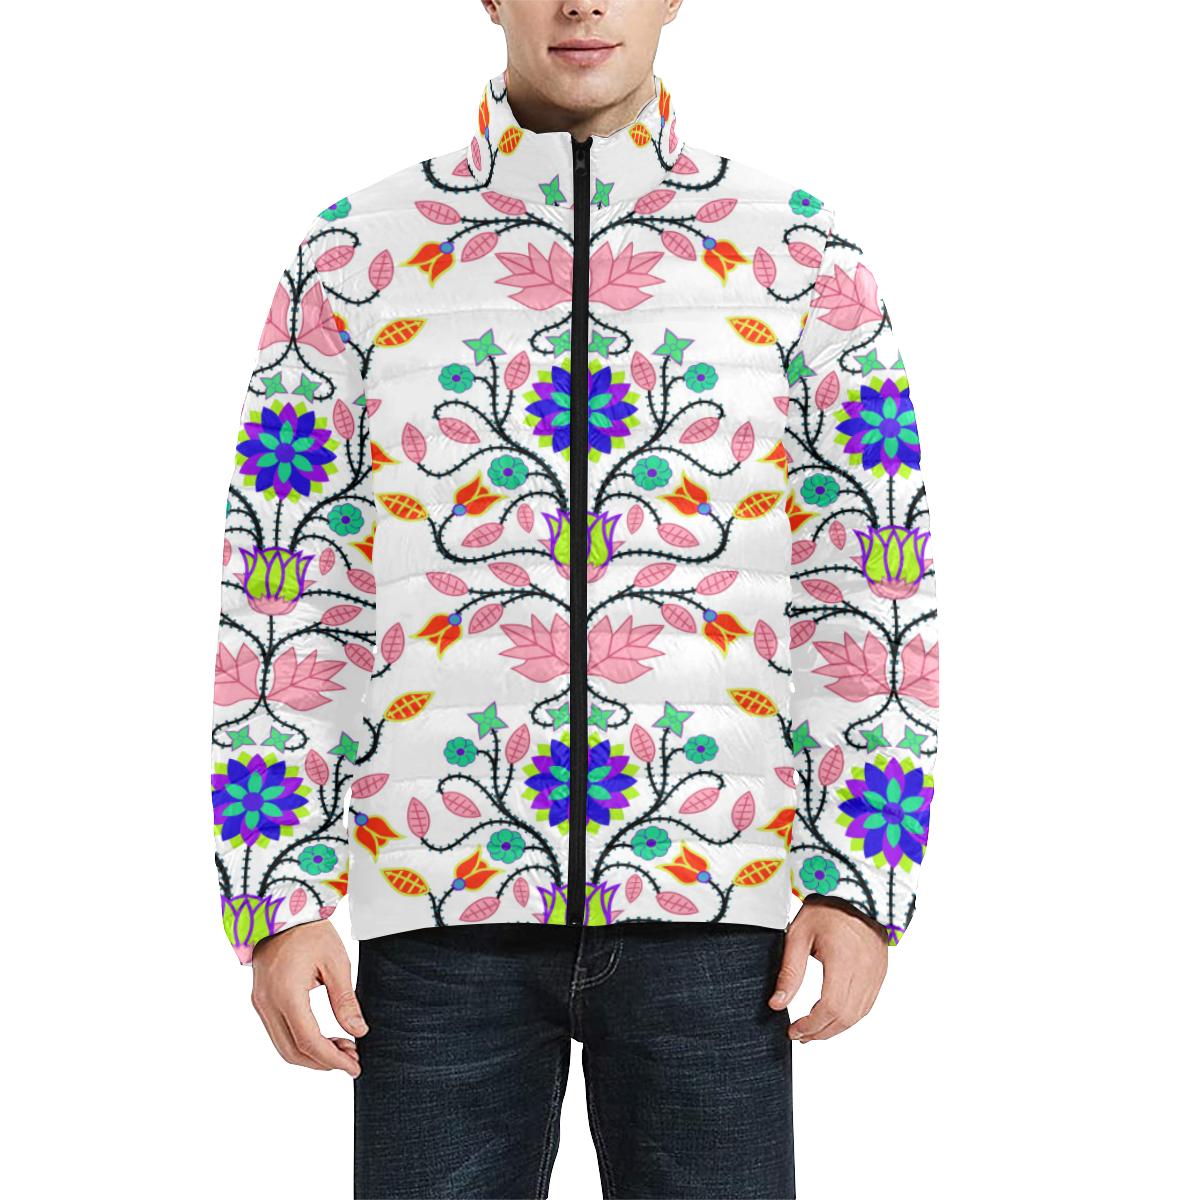 Floral Beadwork Four Clans White Men's Stand Collar Padded Jacket (Model H41) Men's Stand Collar Padded Jacket (H41) e-joyer 